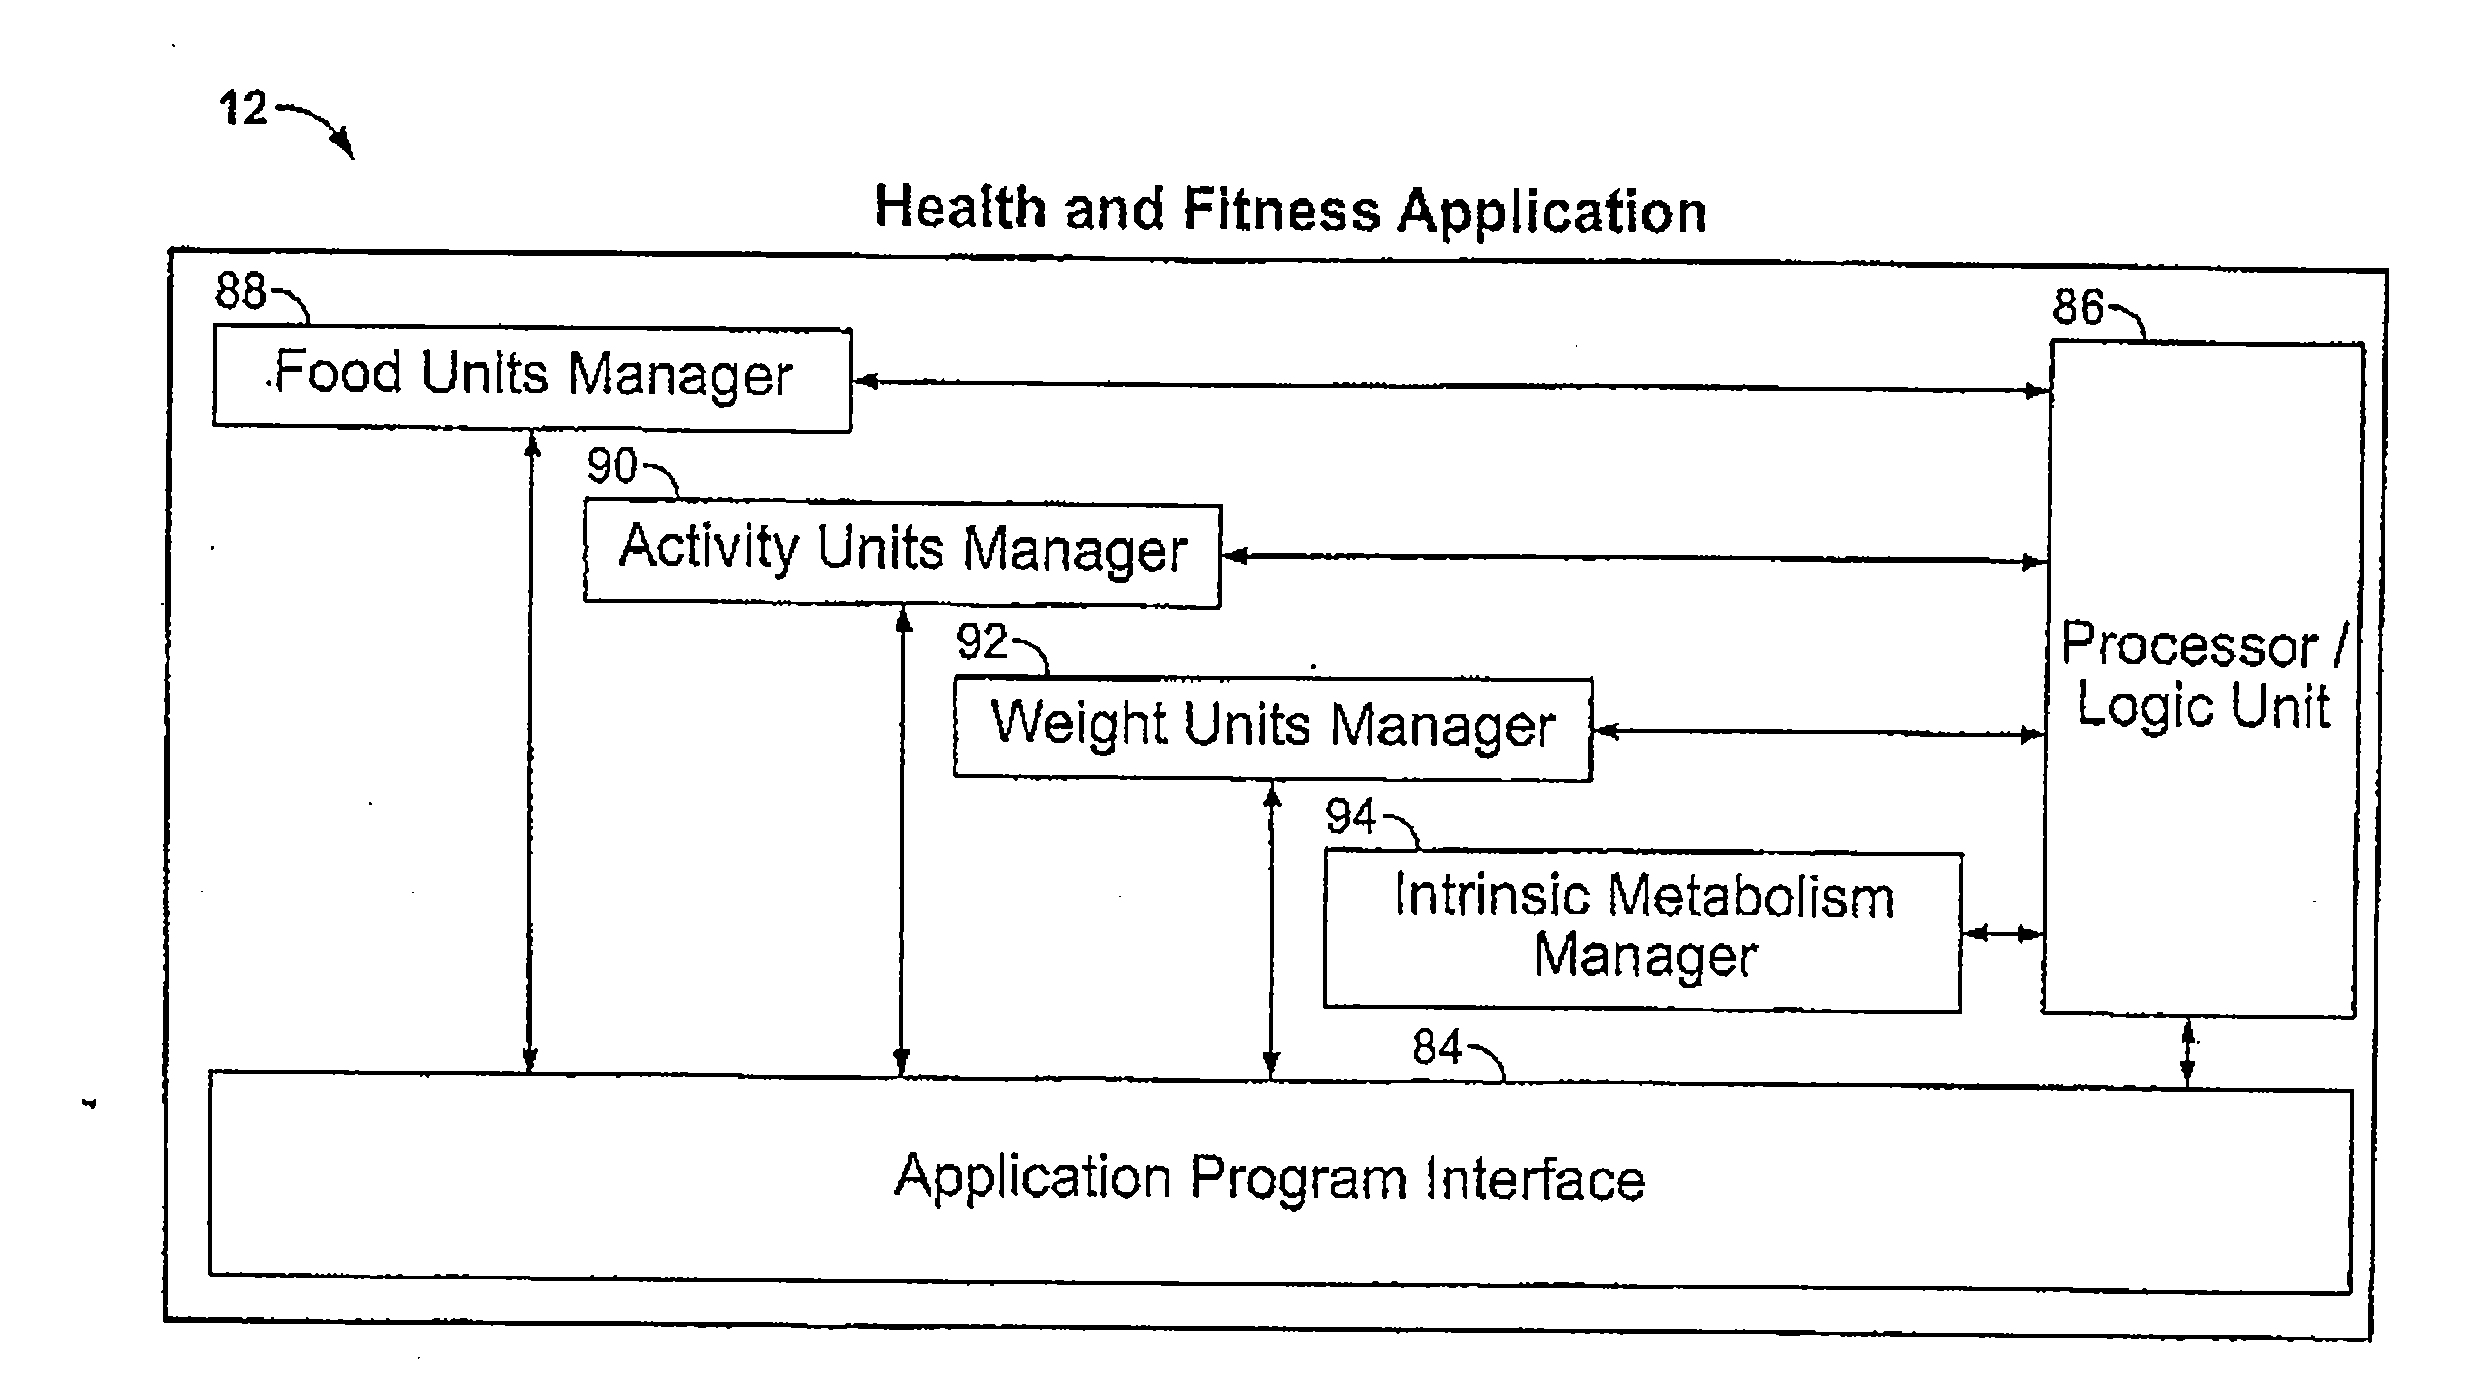 Health and fitness management system